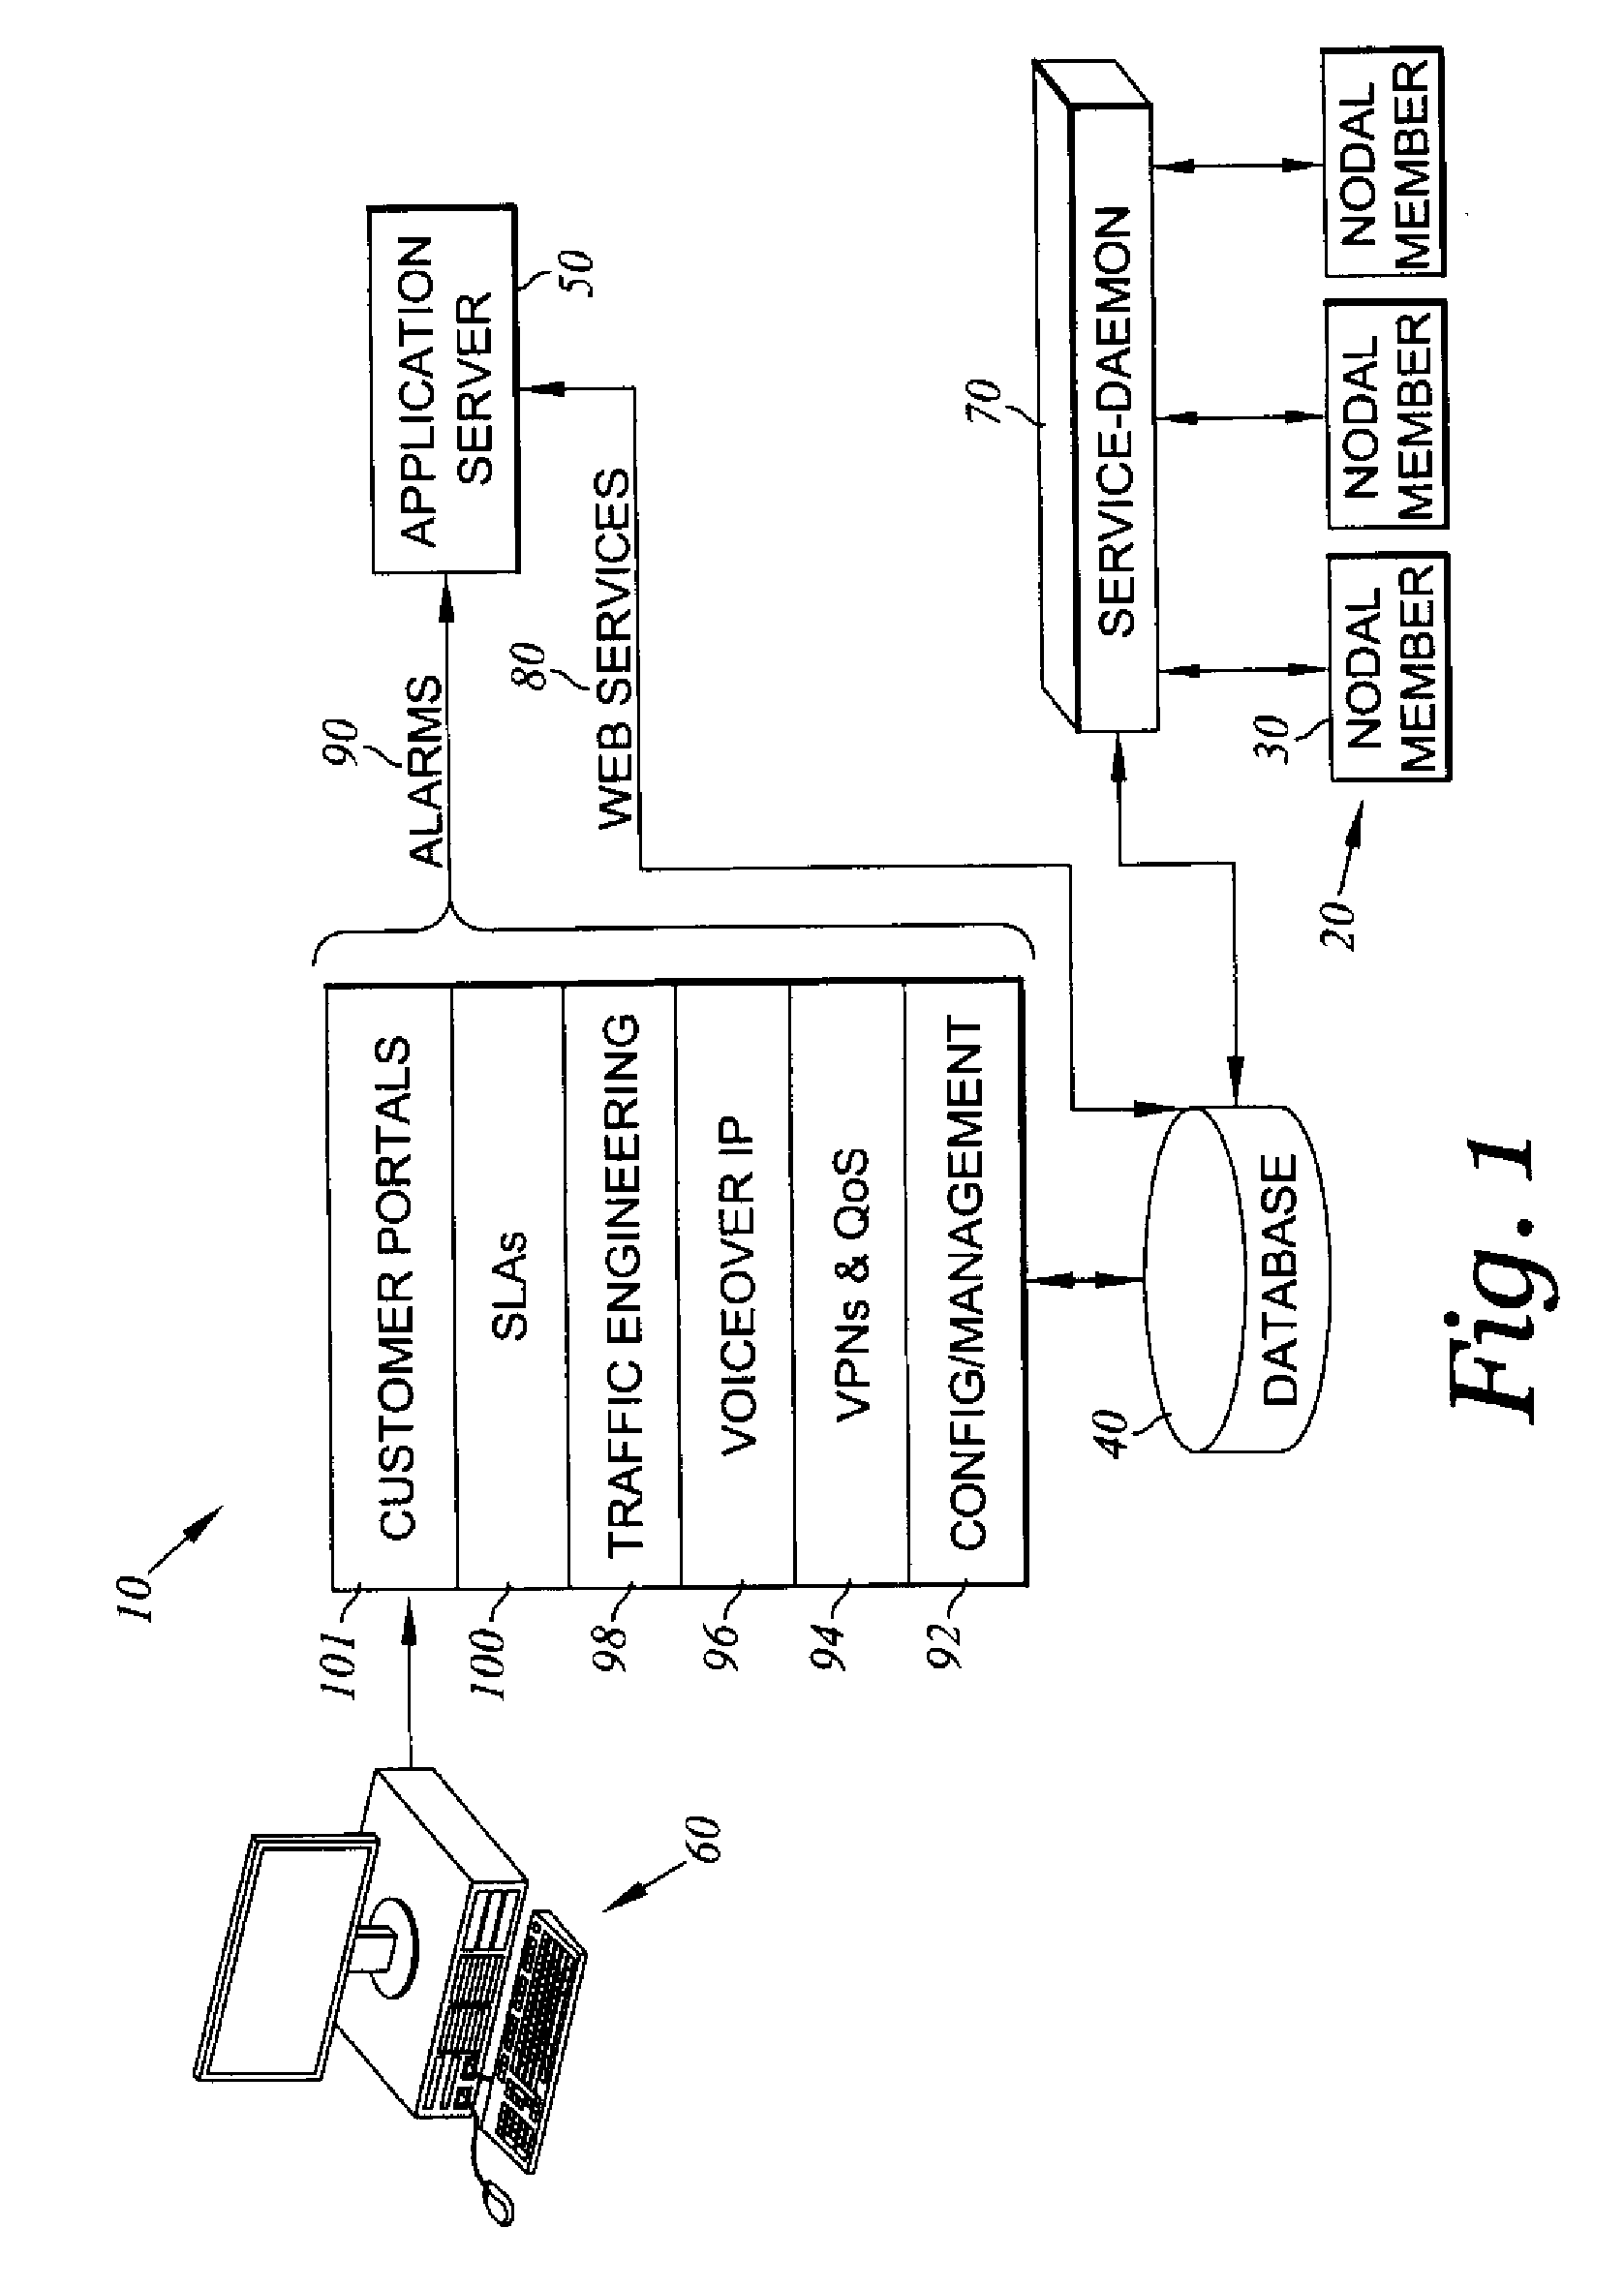 System and method for facilitating carrier ethernet performance and quality measurements